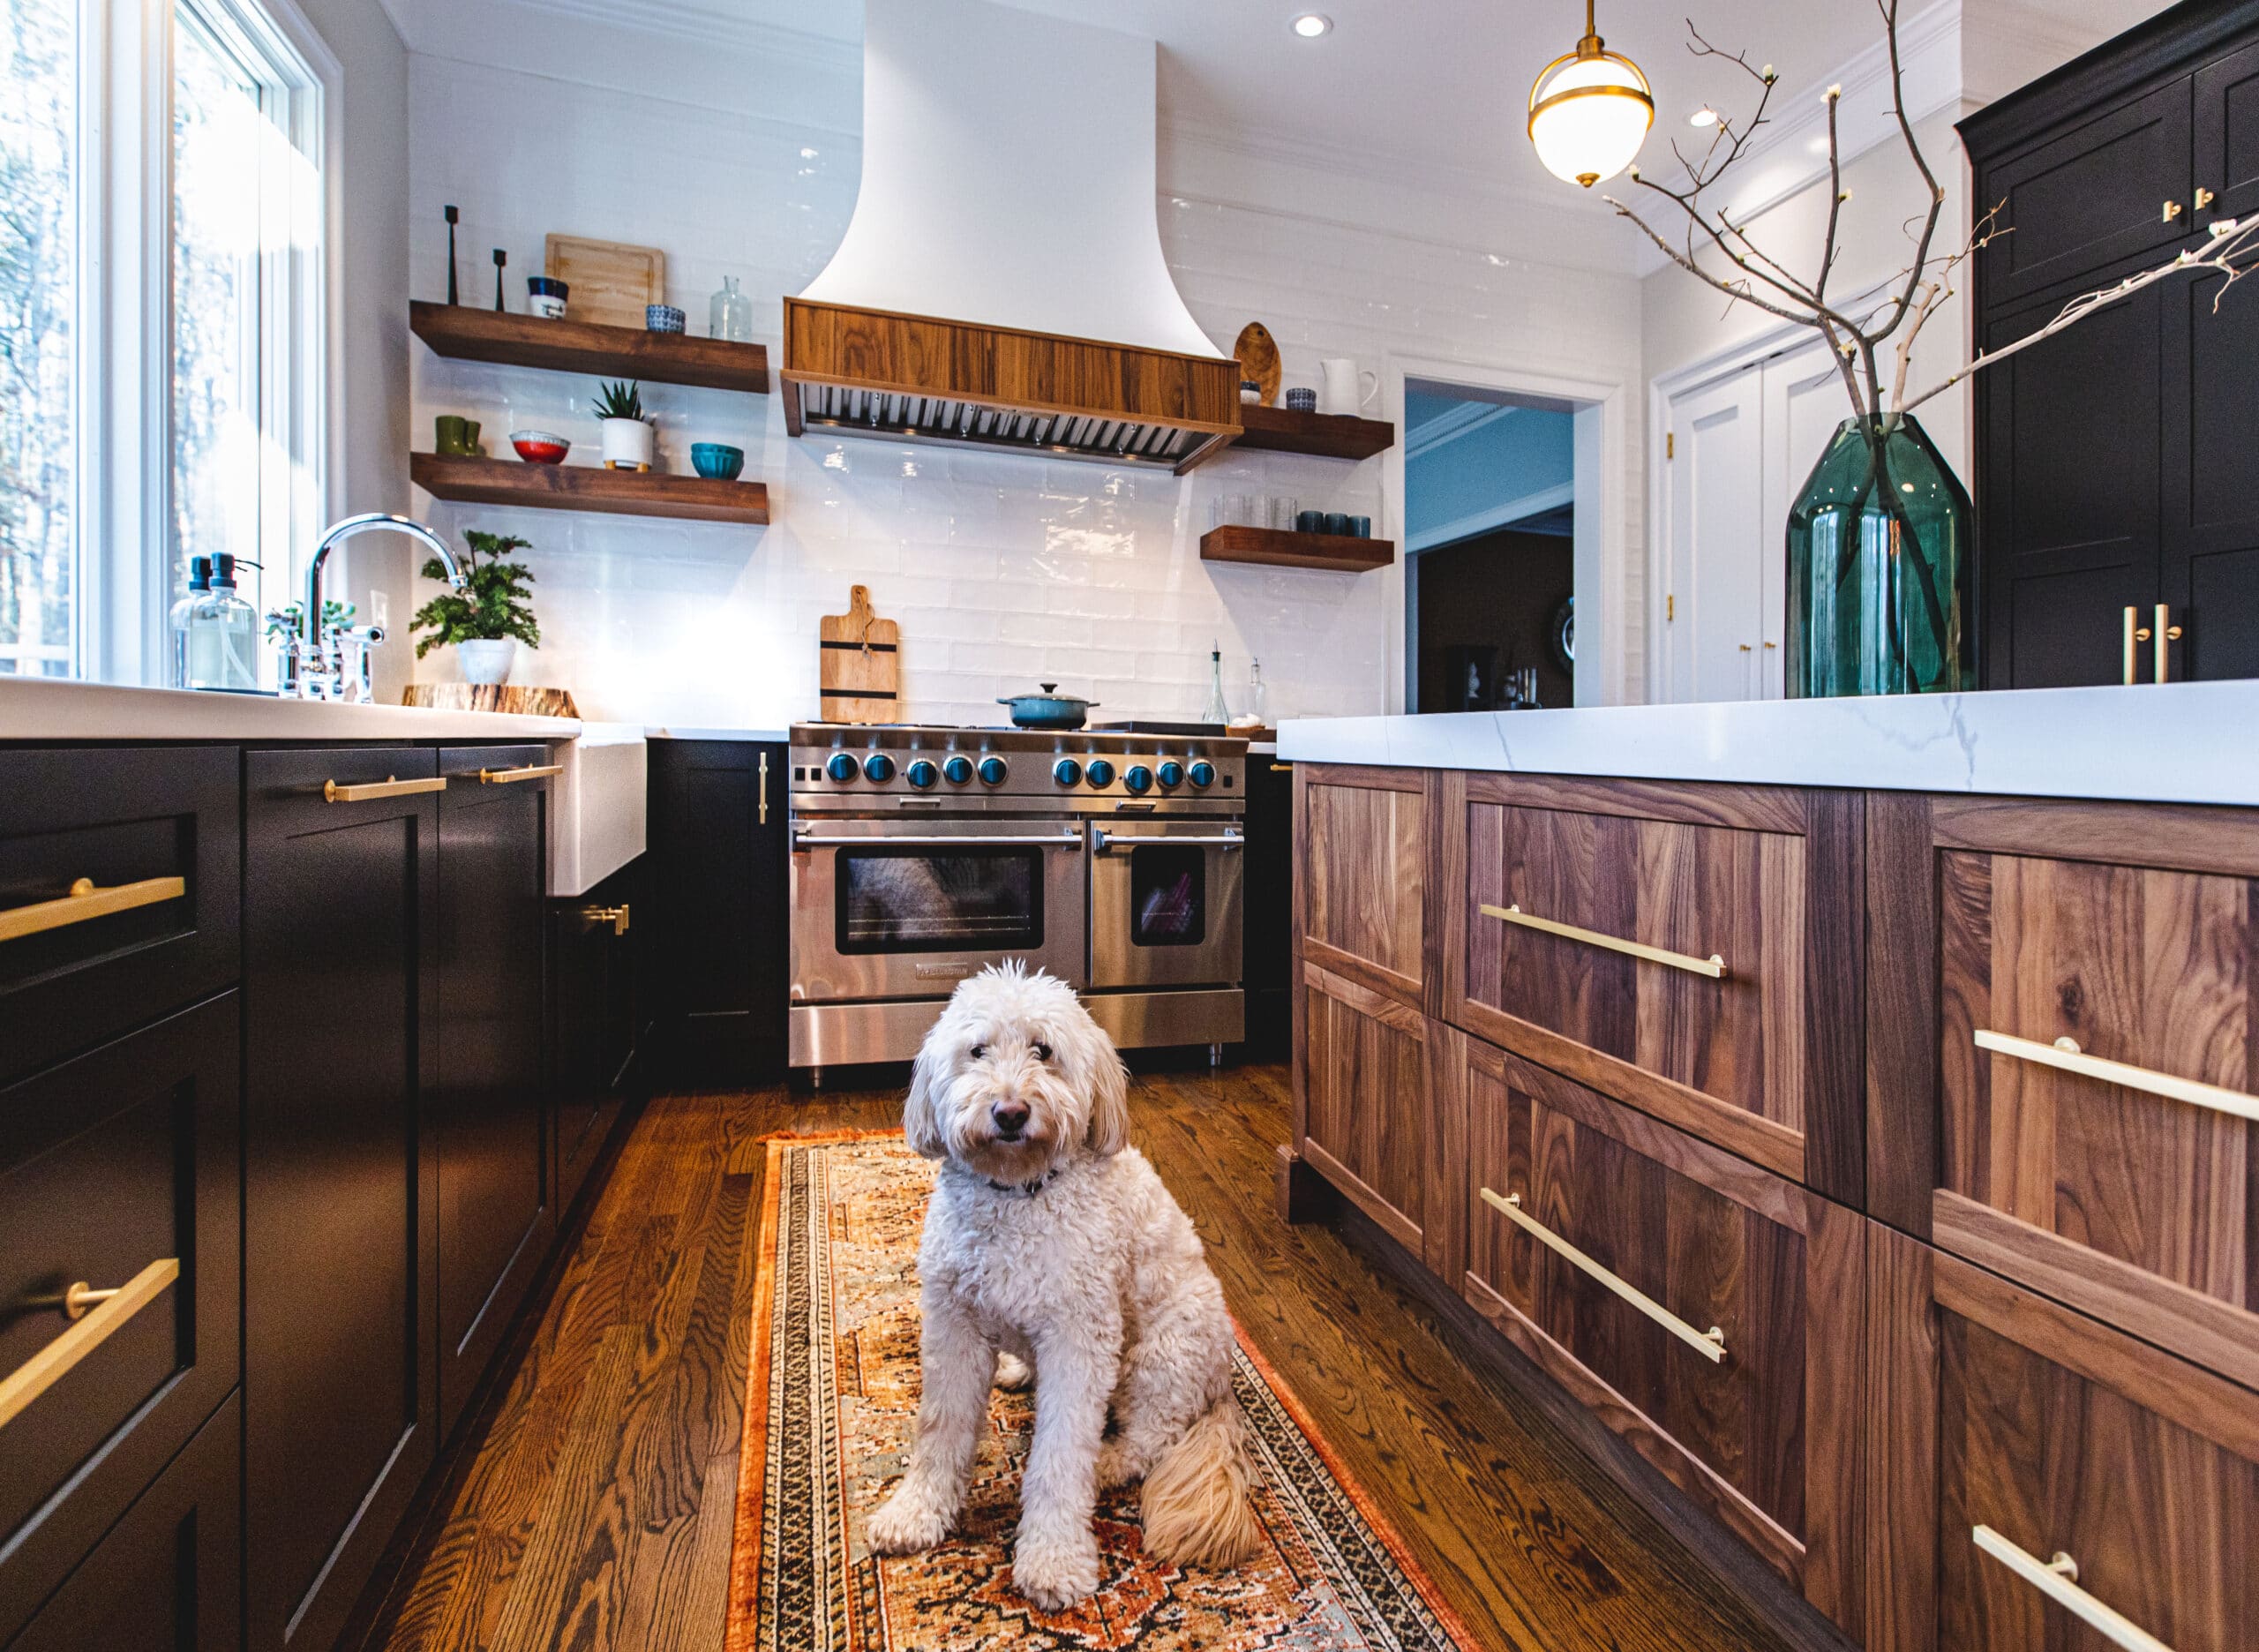 A dog sitting in a kitchen